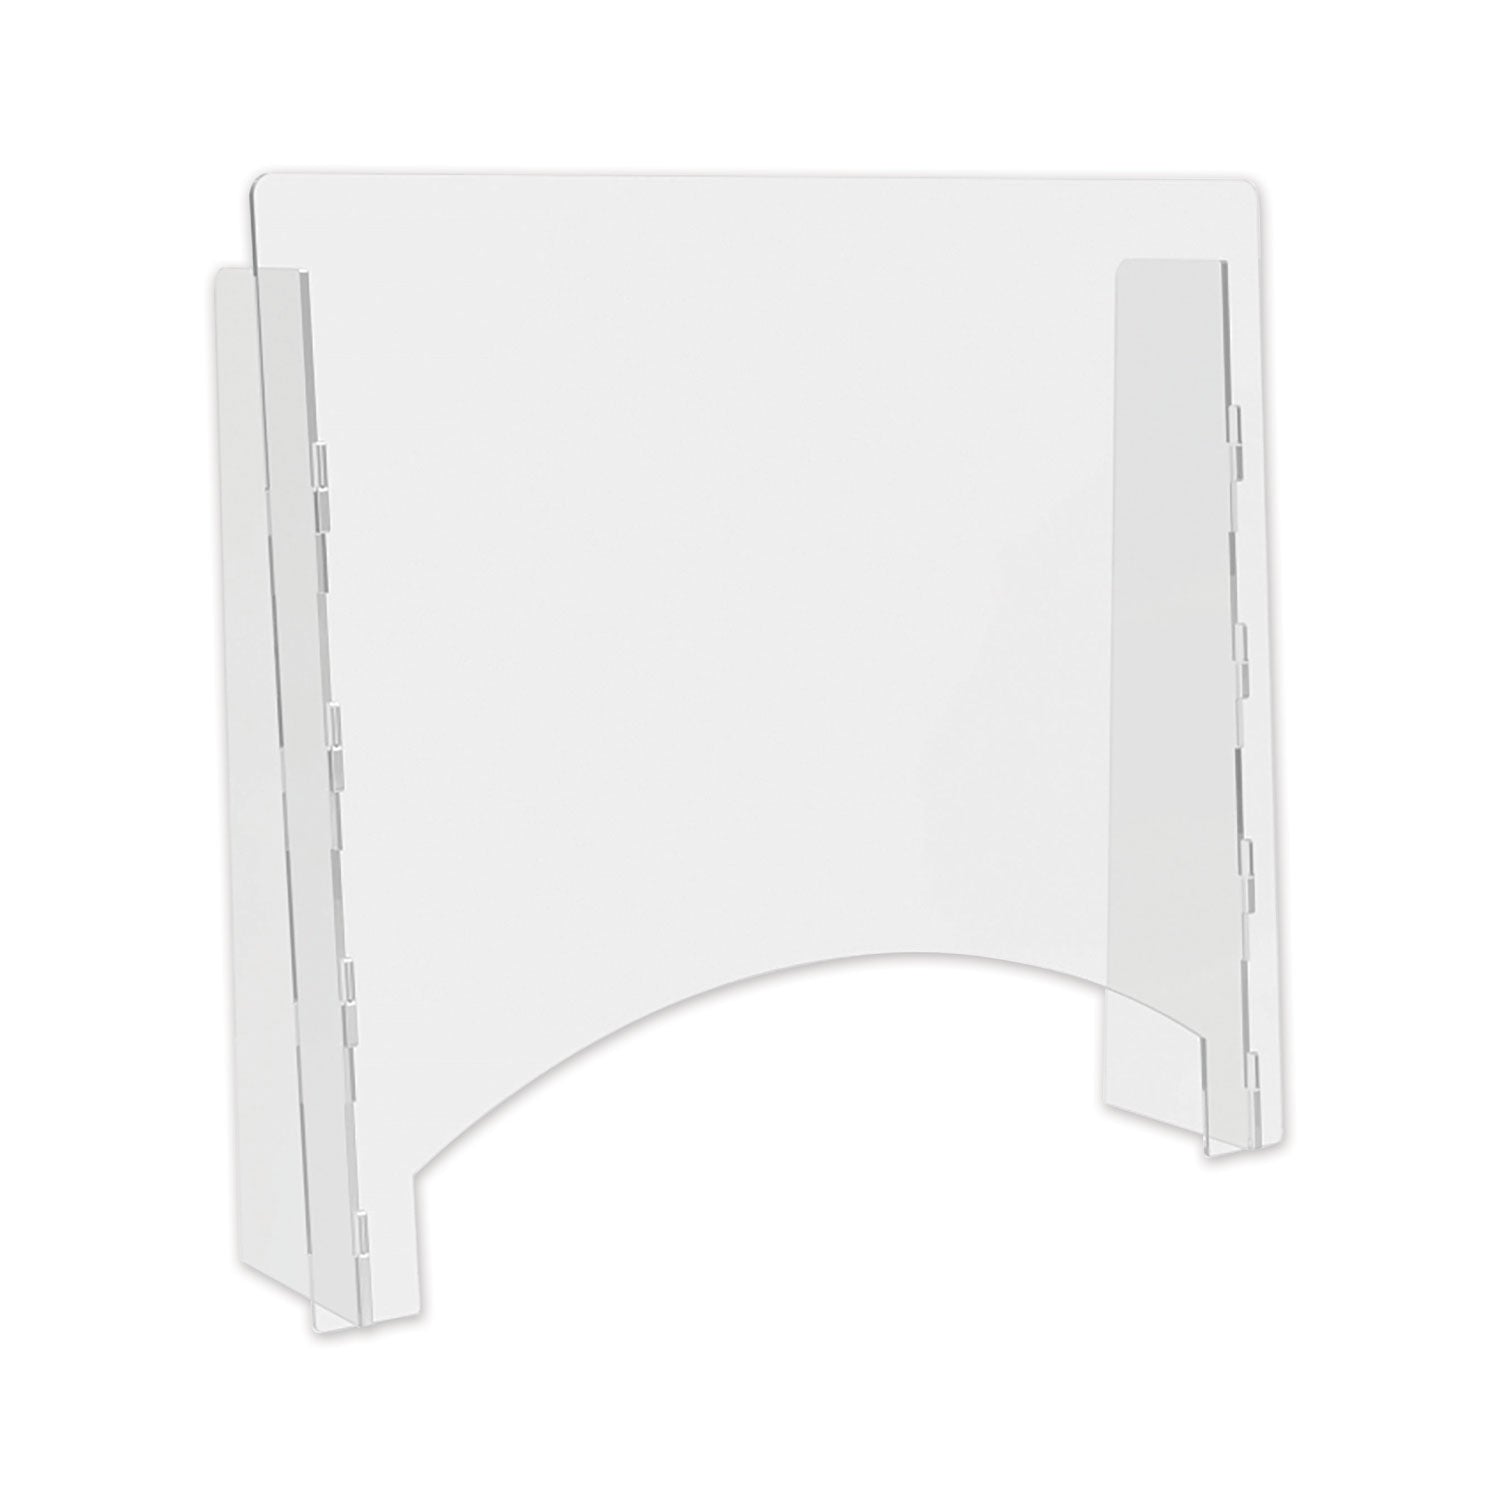 counter-top-barrier-with-pass-thru-27-x-6-x-2375-polycarbonate-clear-2-carton_defpbctpc2724p - 1